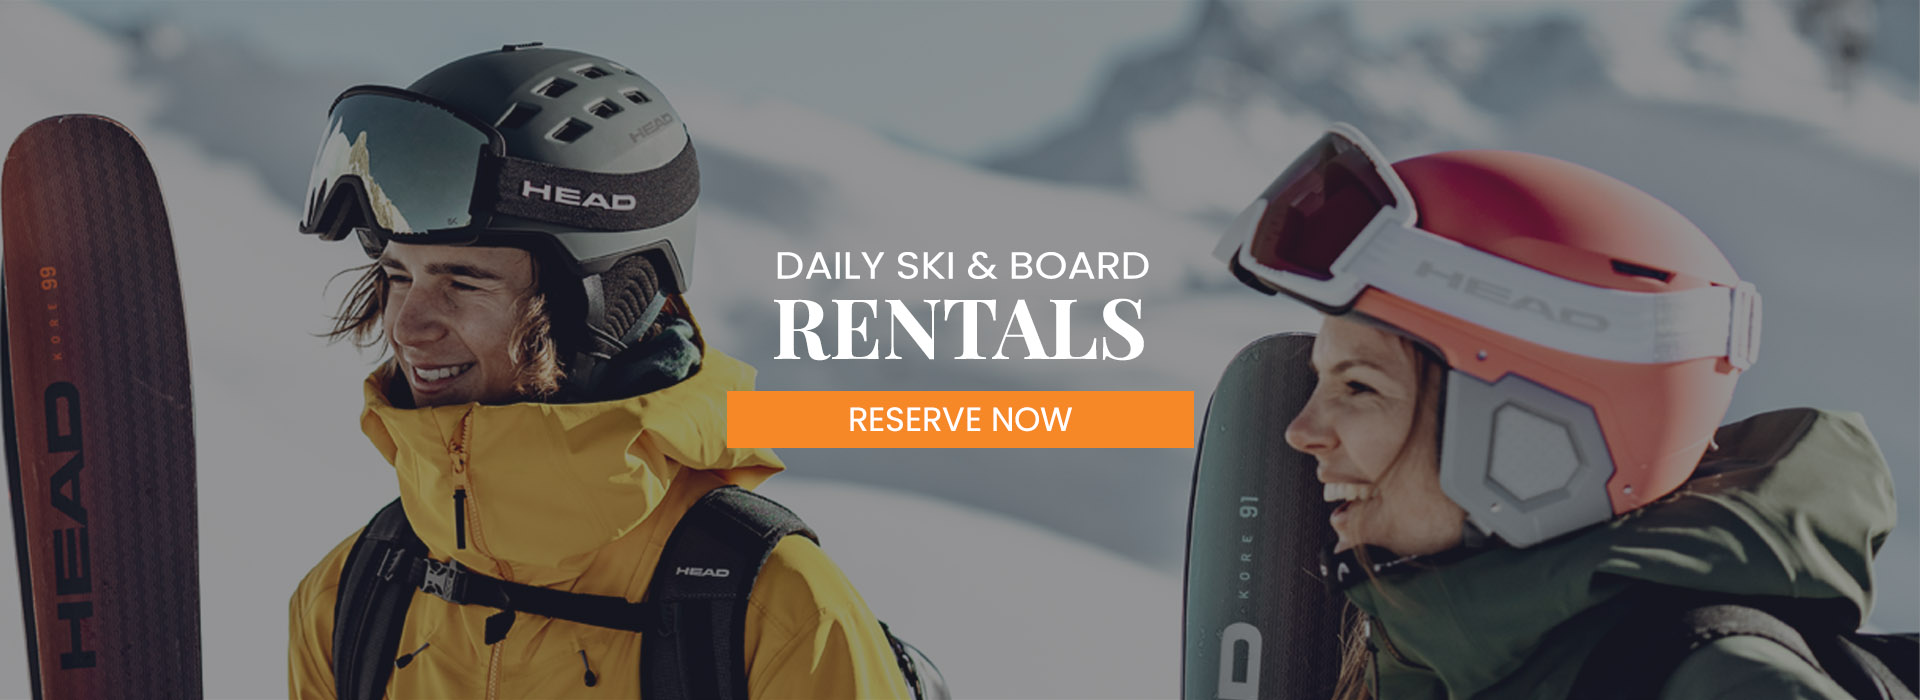 Daily ski and snowboard rentals for the whole family at BlueZone Sports. Reserve today!